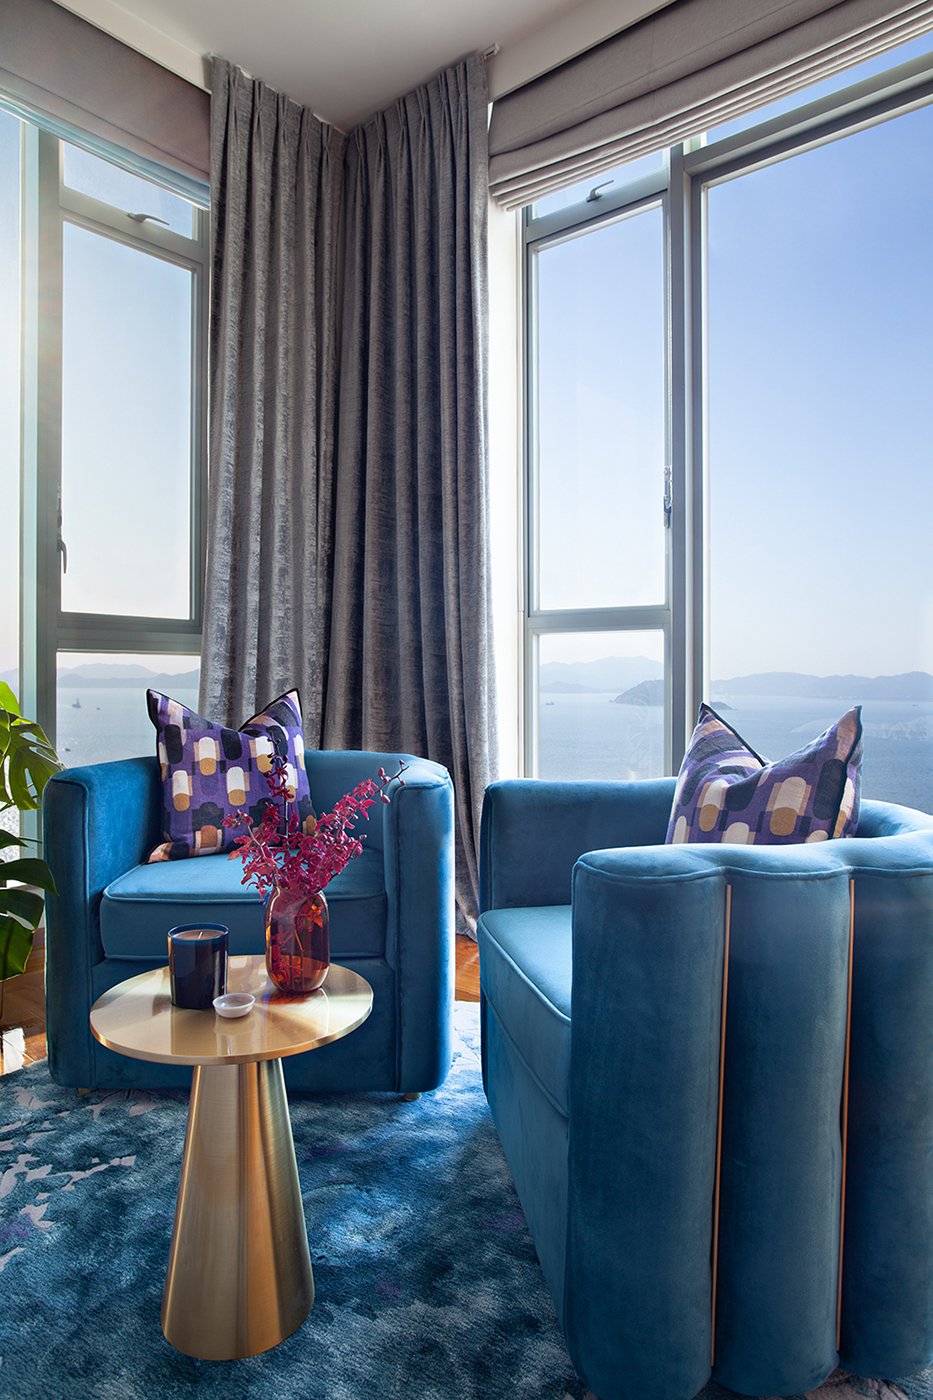 Living room in apartment on Hong Kong Island shot by Denice Hough for SCMP Magazine